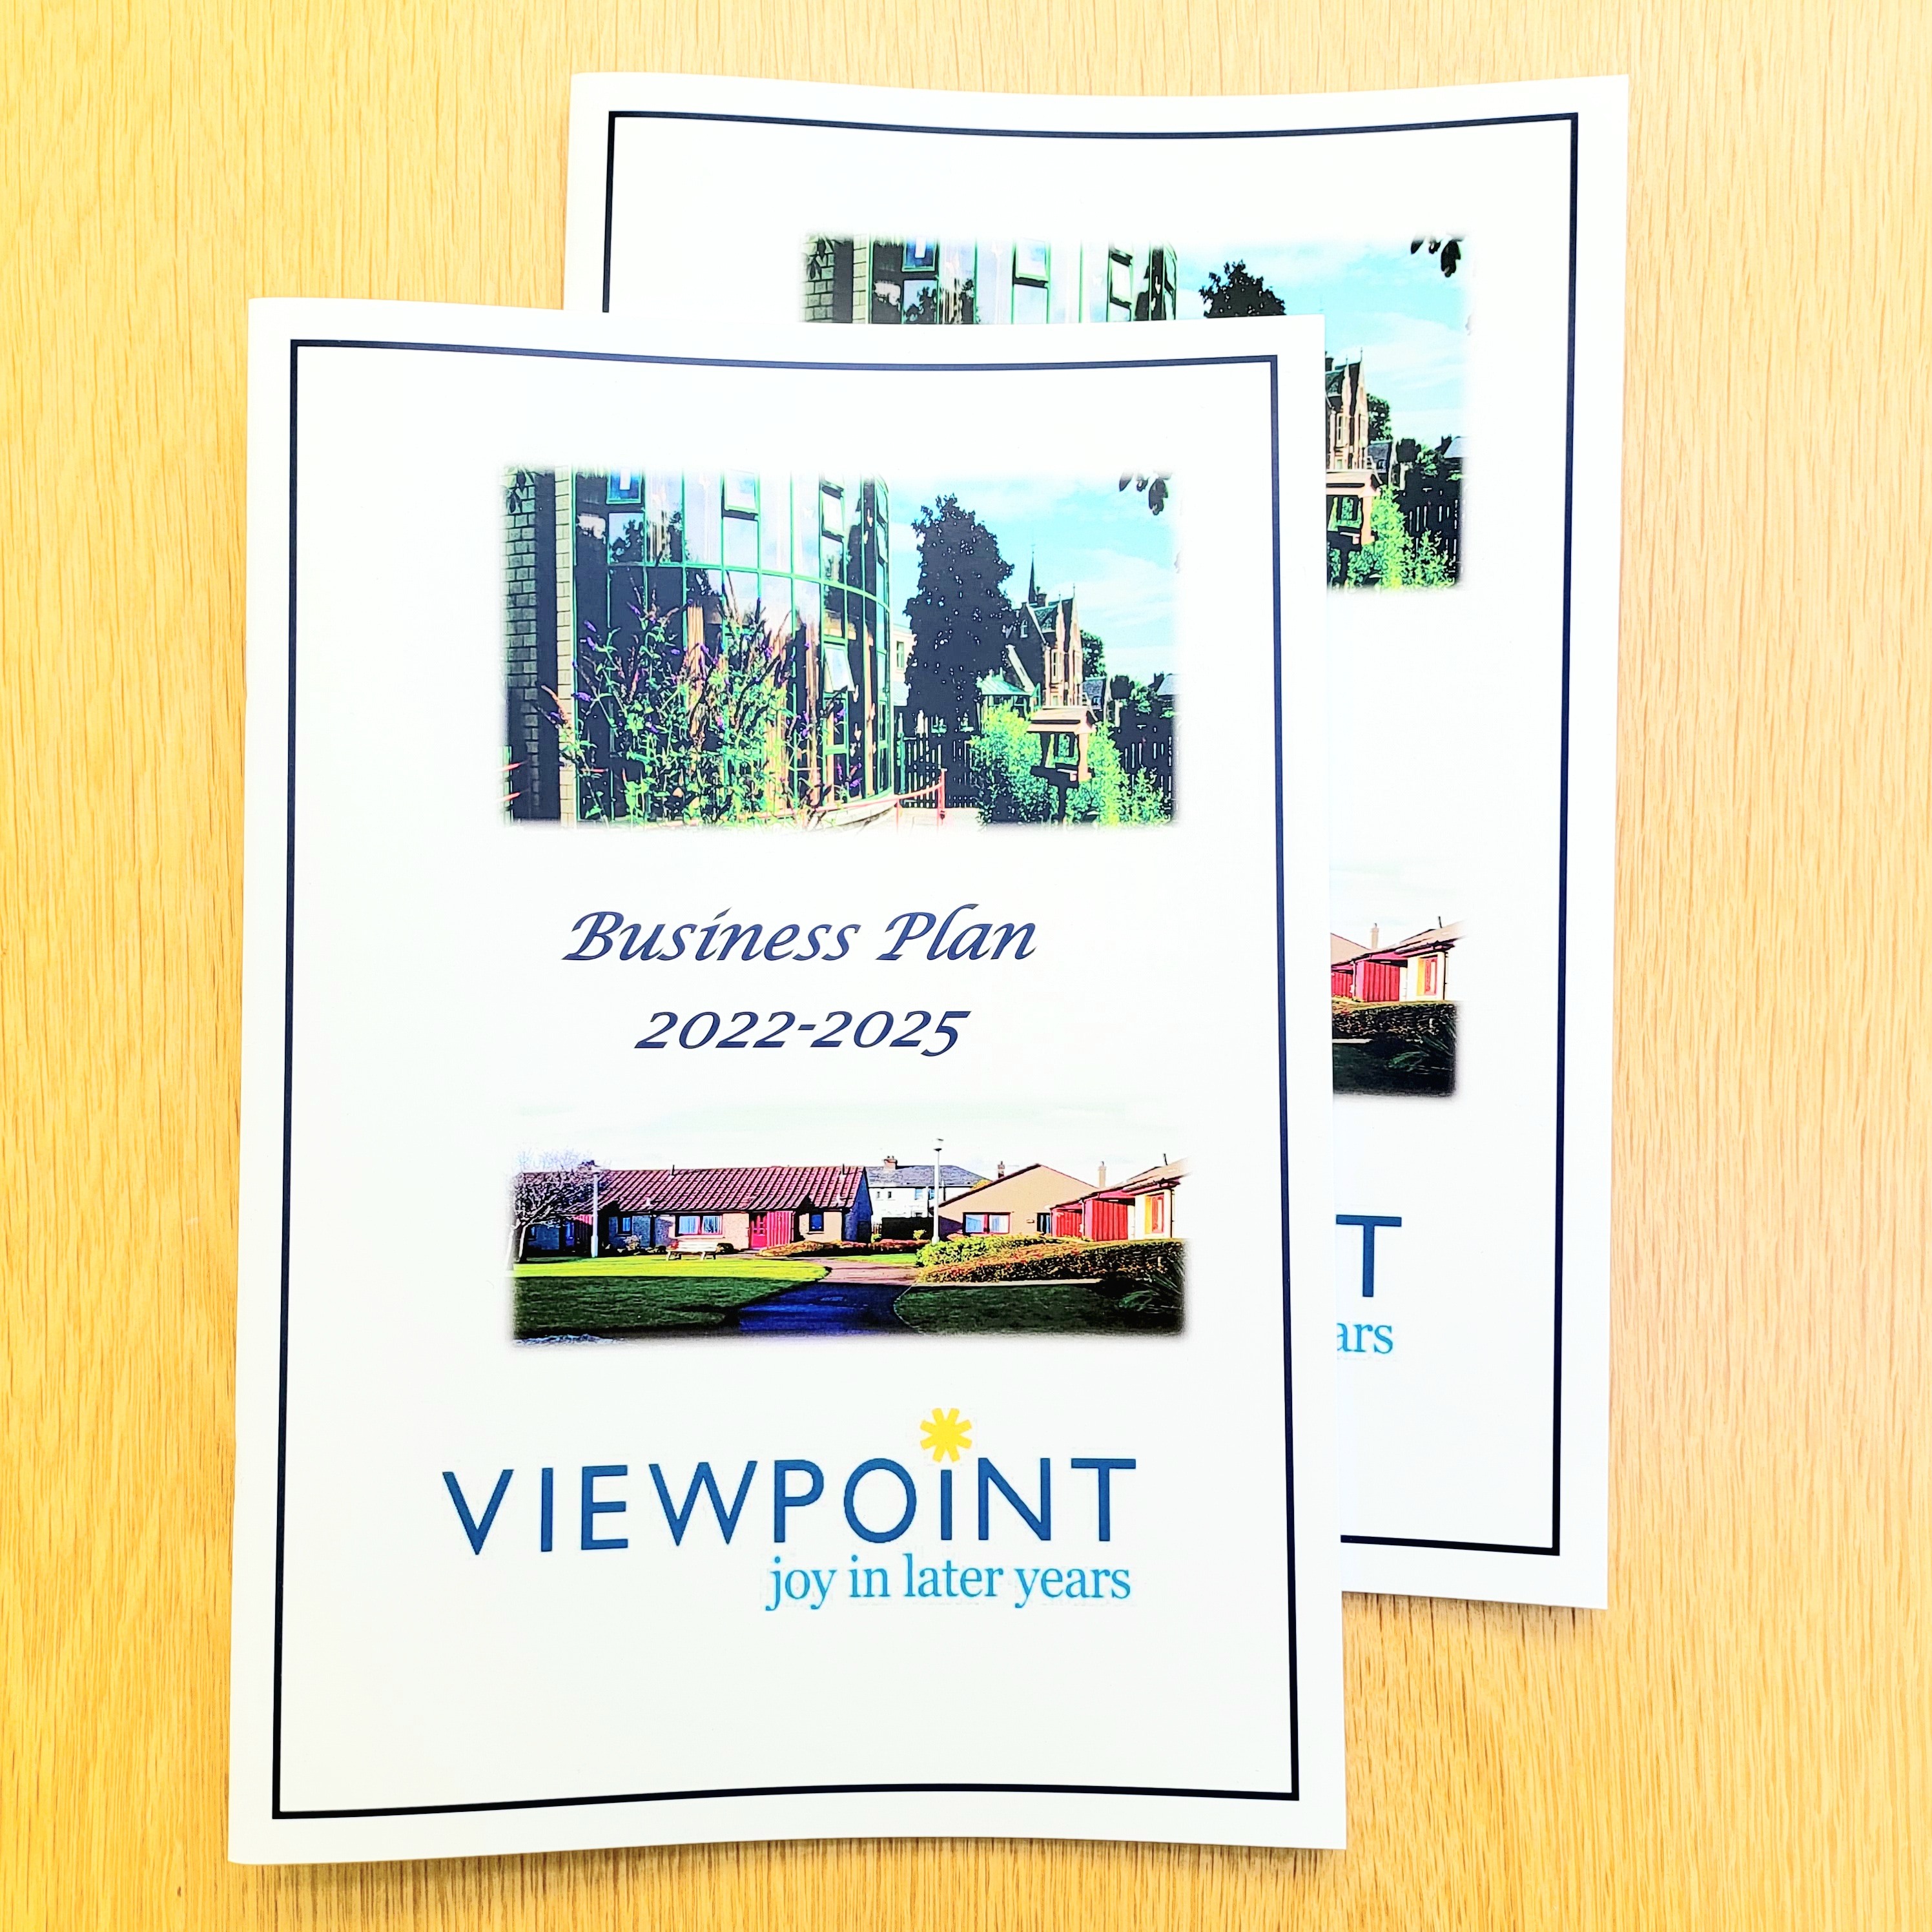 Viewpoint launches 3-year Business Plan